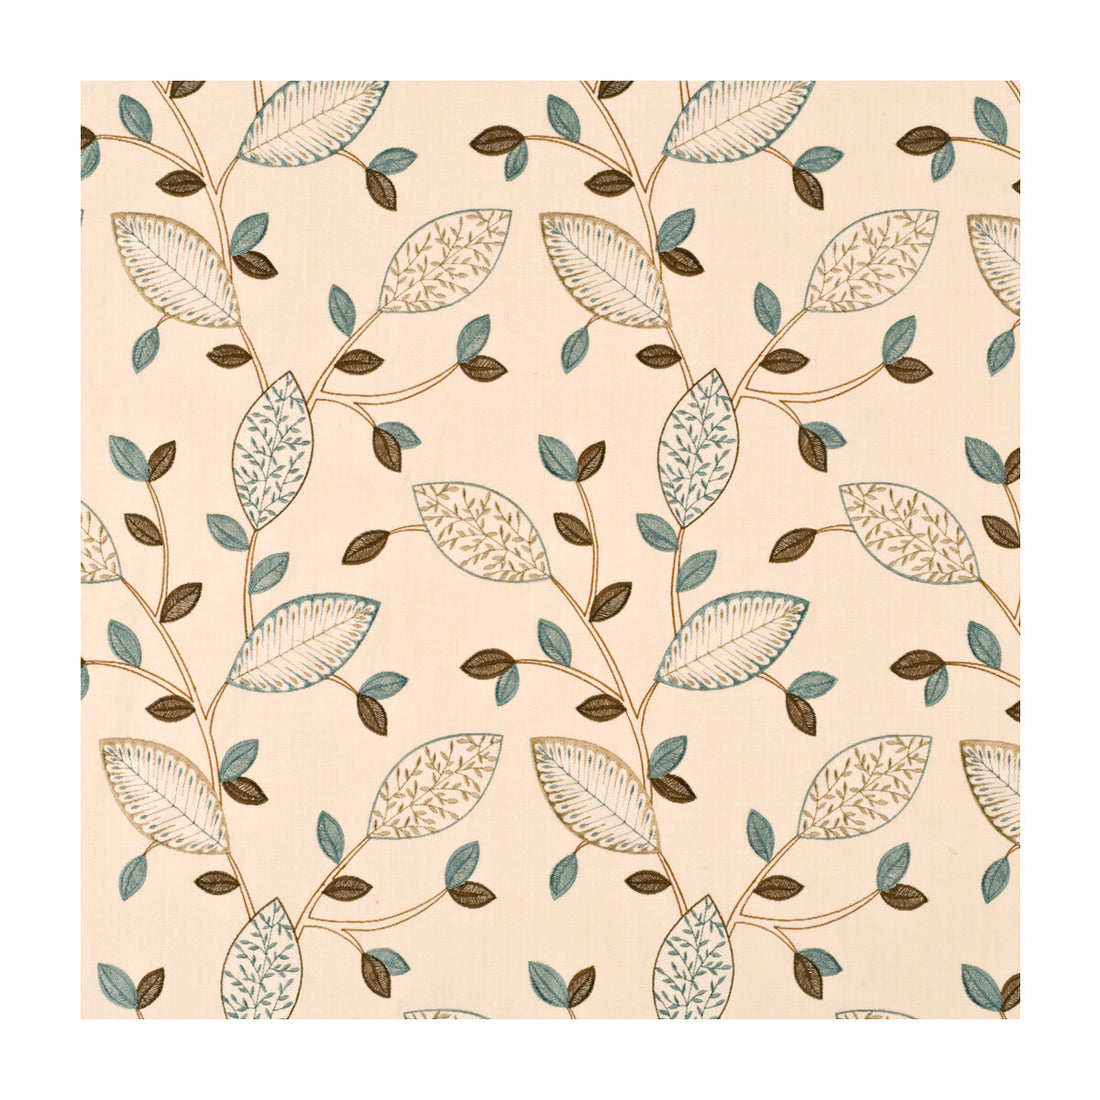 Lauretta fabric in teal/biscuit color - pattern PF50142.3.0 - by Baker Lifestyle in the Country Garden collection